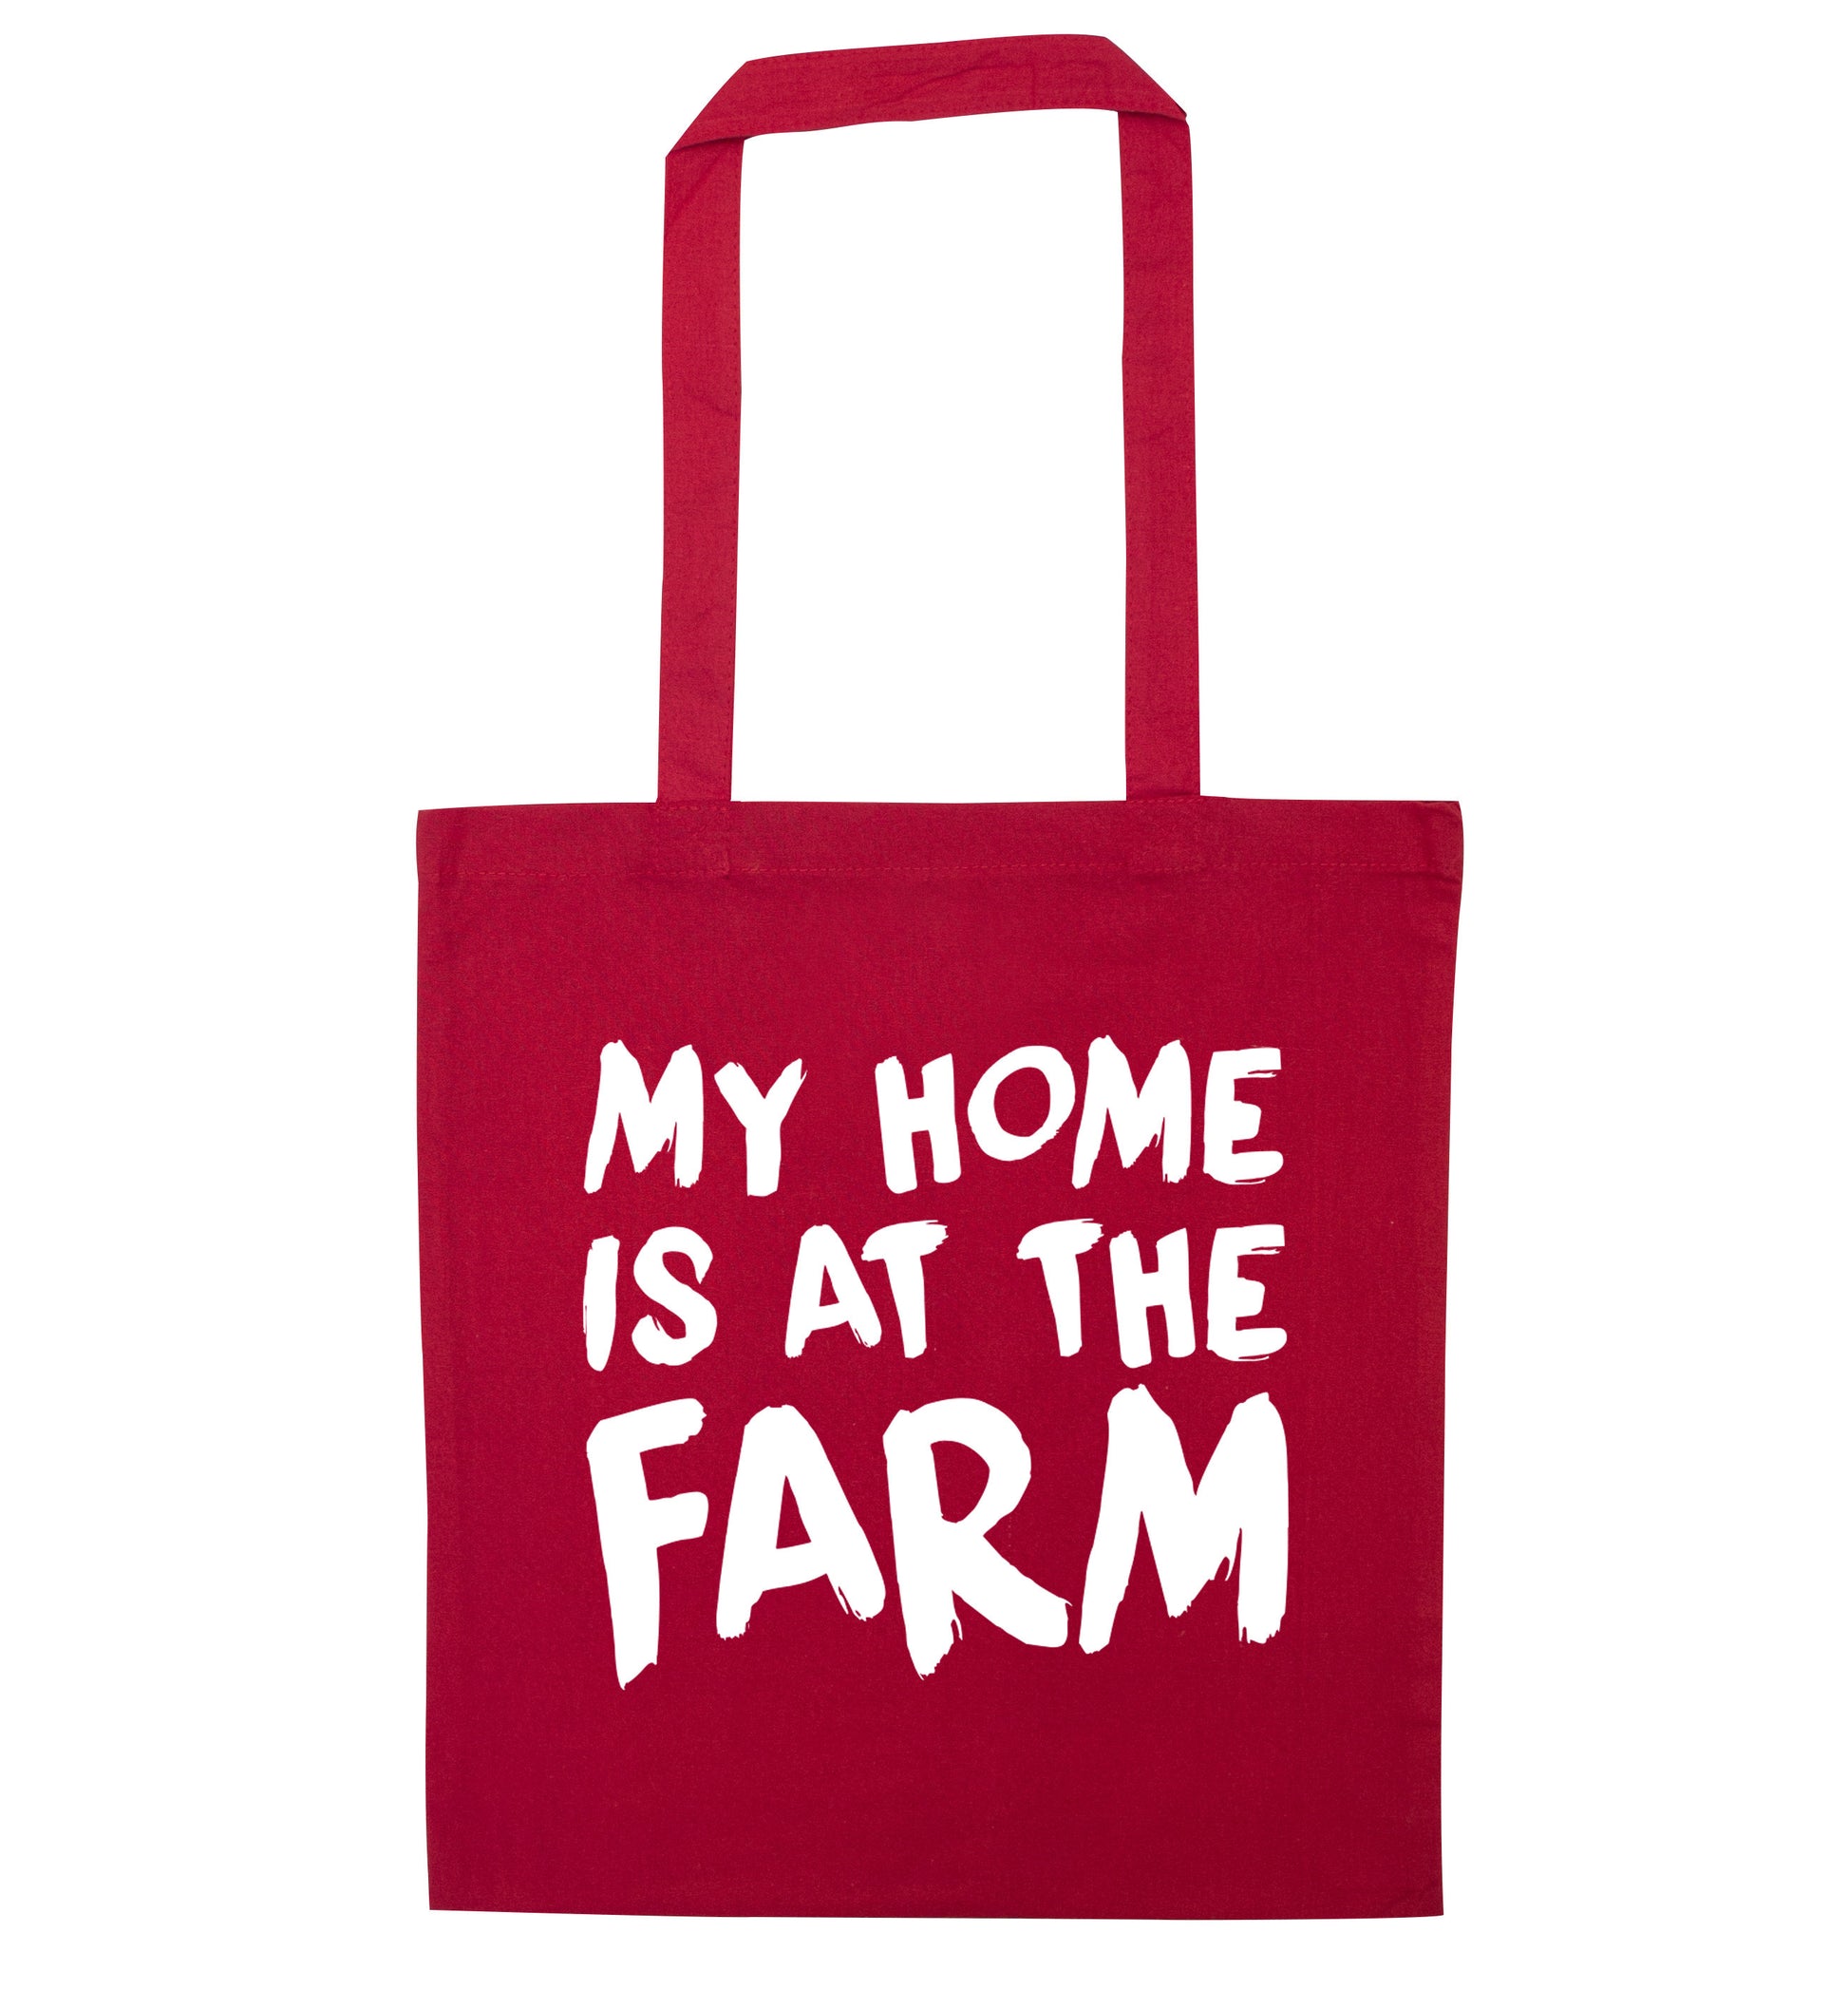 My home is at the farm red tote bag